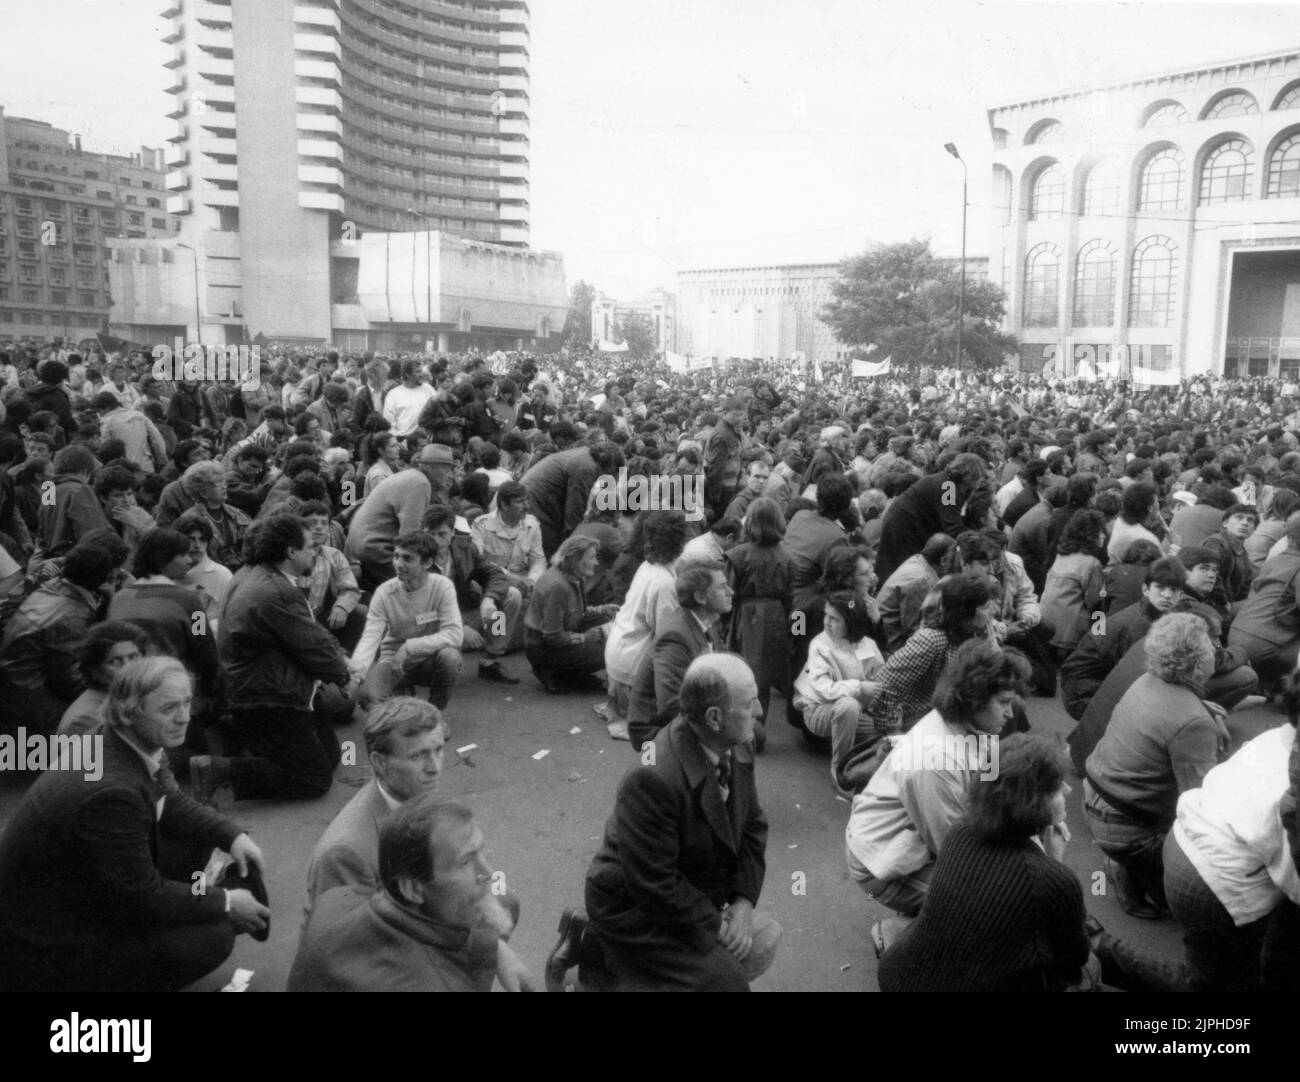 Bucharest, Romania, April 1990. "Golaniada", a major anti-communism protest  in the University Square following the Romanian Revolution of 1989. People would gather daily to protest the ex-communists that grabbed the power after the Revolution. The main demand was that no former party member would be allowed to run in the elections of May 20th. Stock Photo